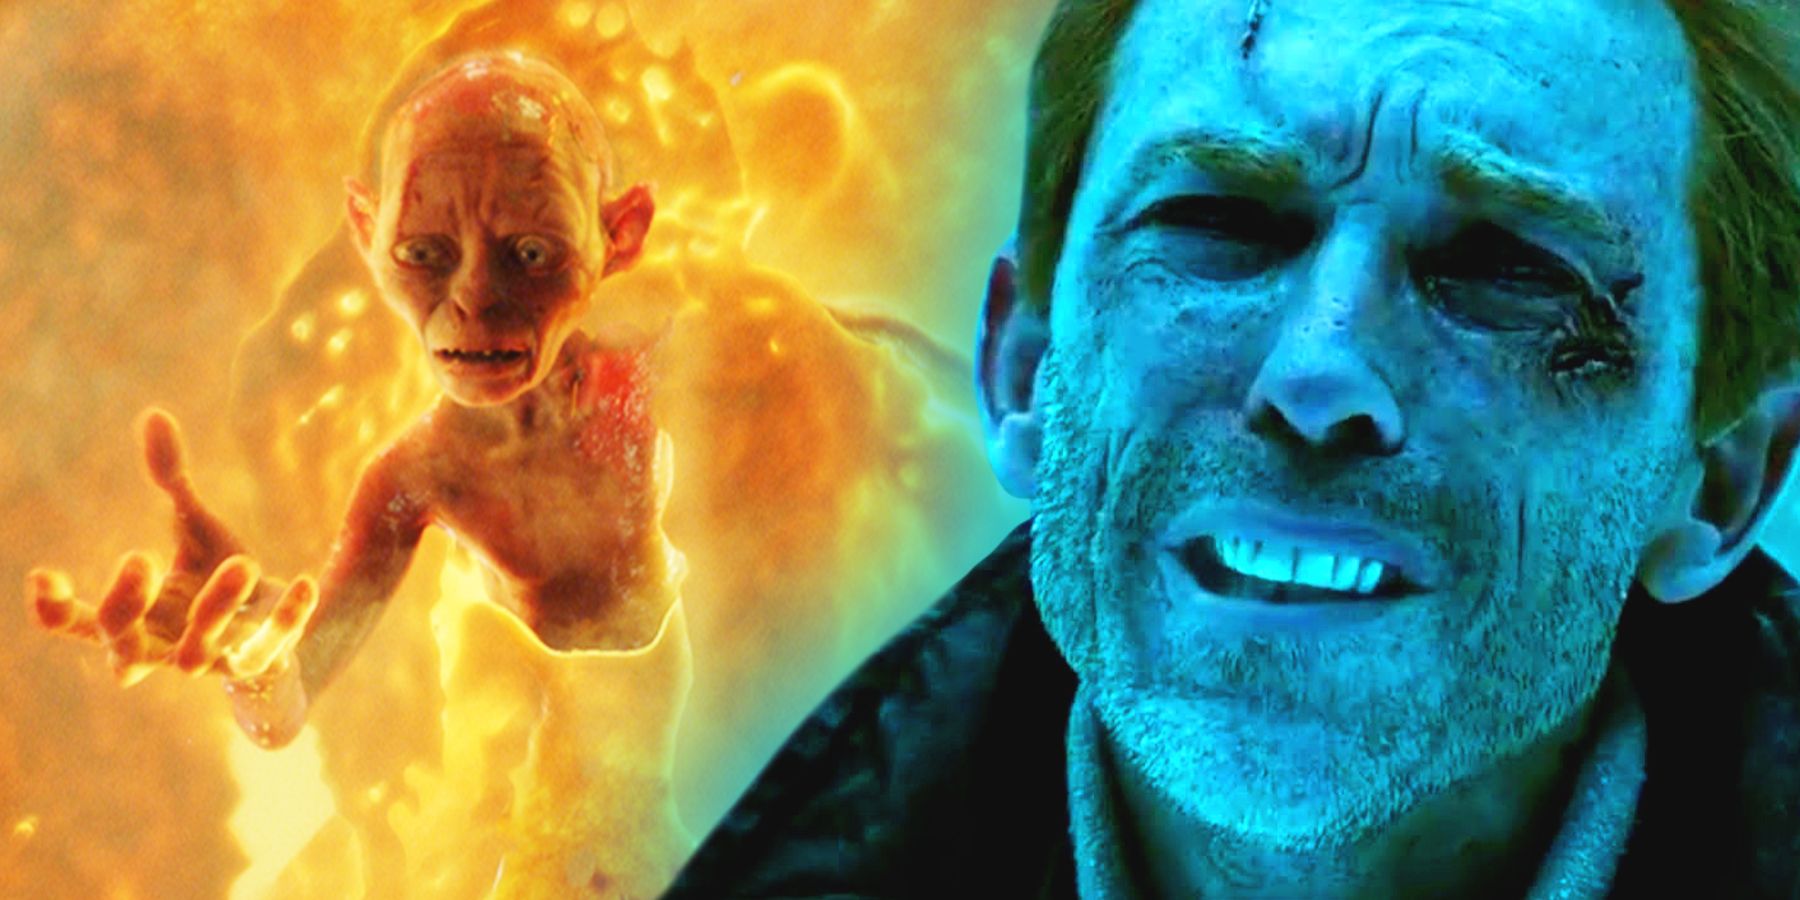 Gollum form movie The Lord of the Rings: The Return of the King and Rorschach from movie The Watchmen